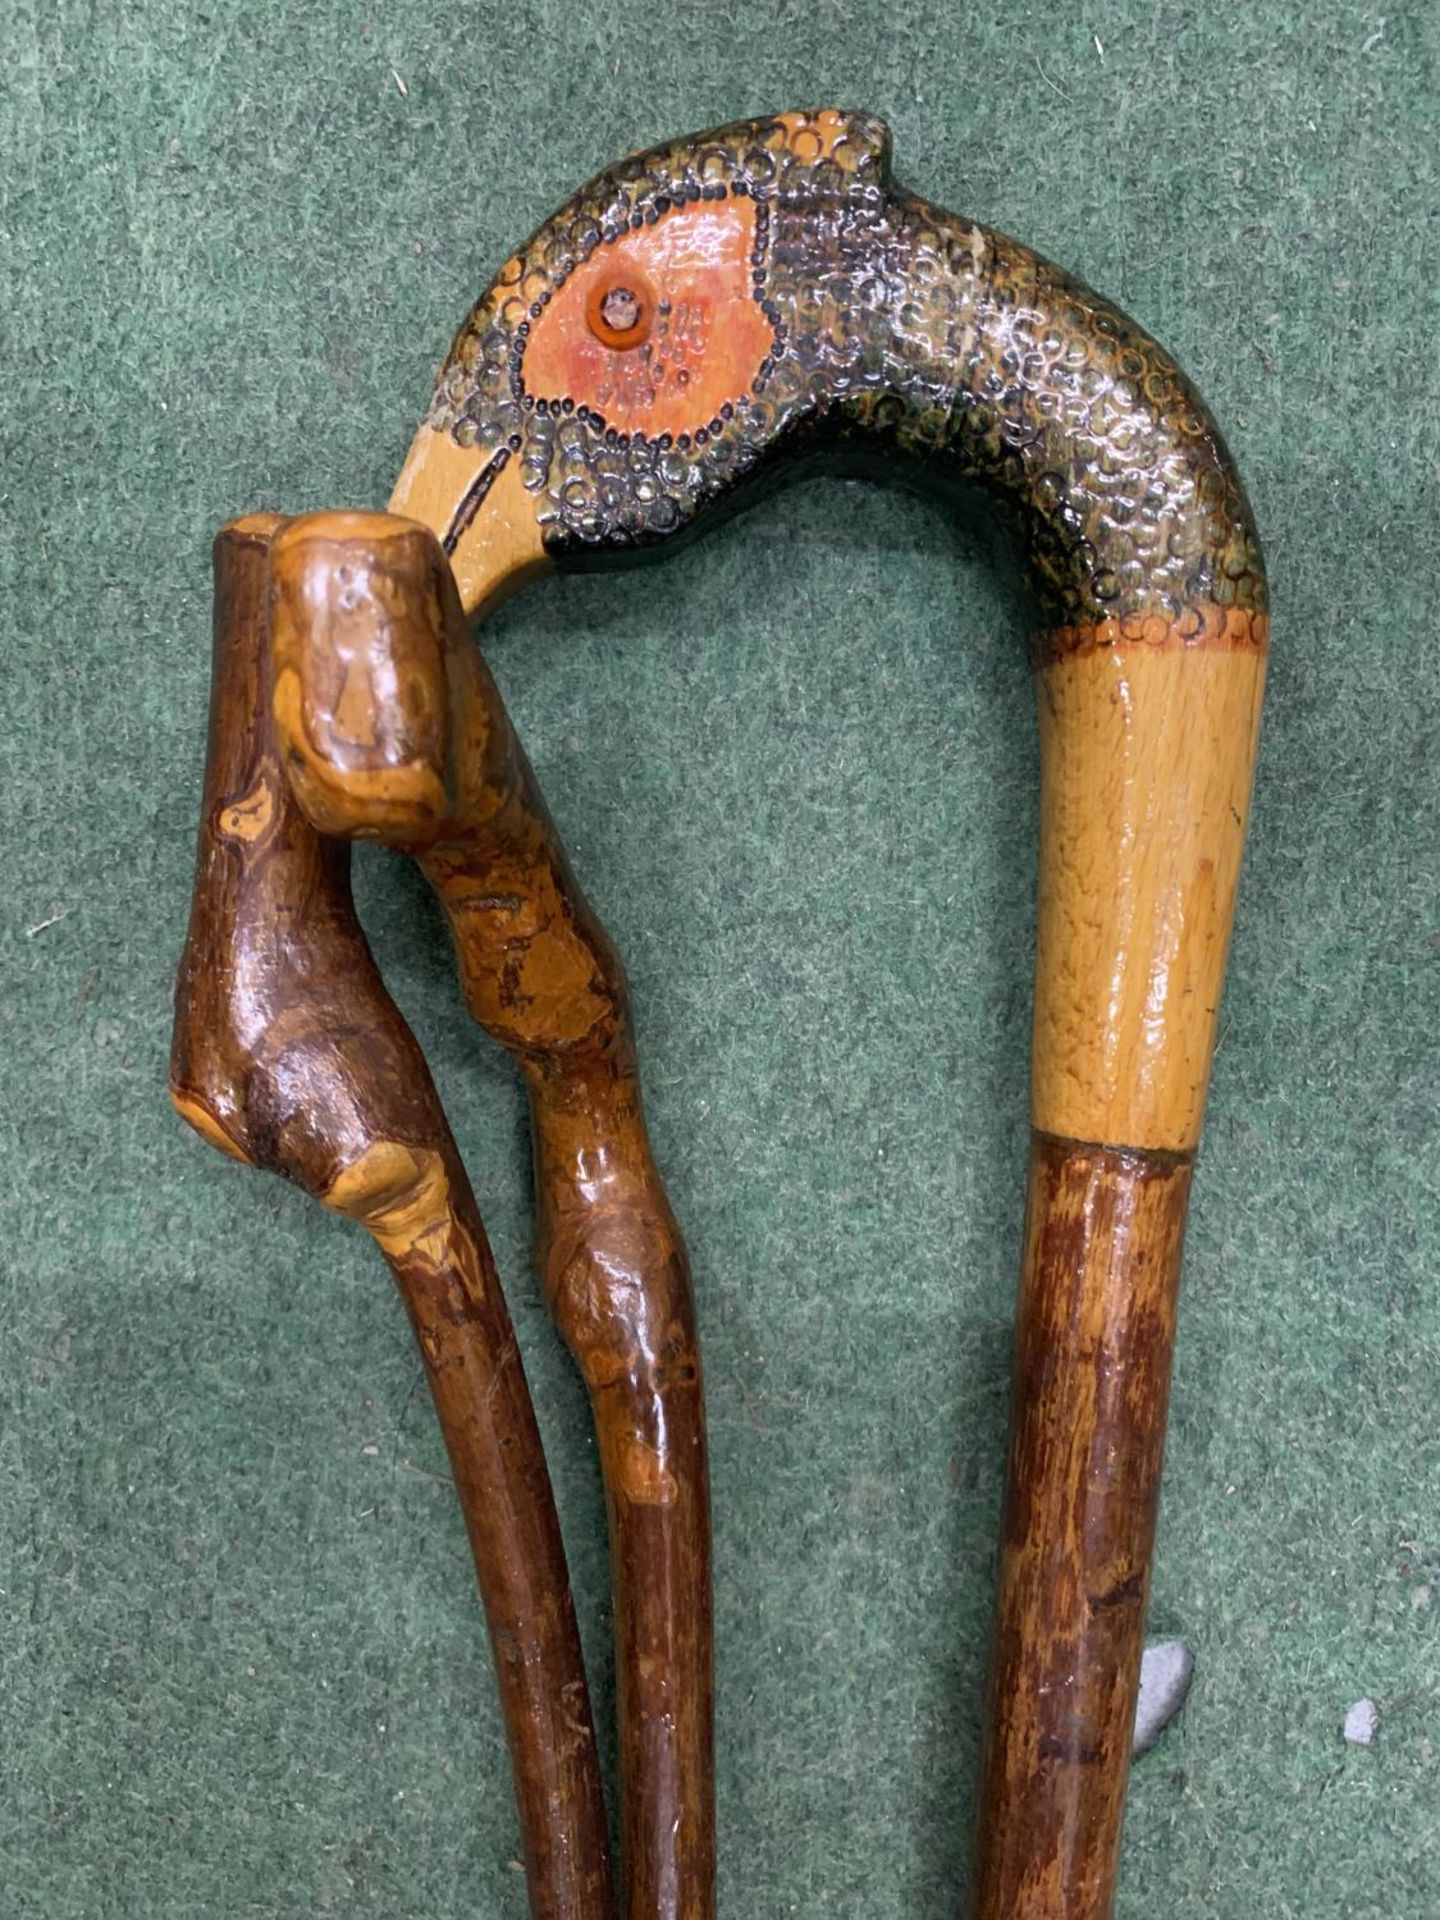 THREE WALKING STICKS, ONE WITH A BIRDS HEAD HANDLE - Image 2 of 3